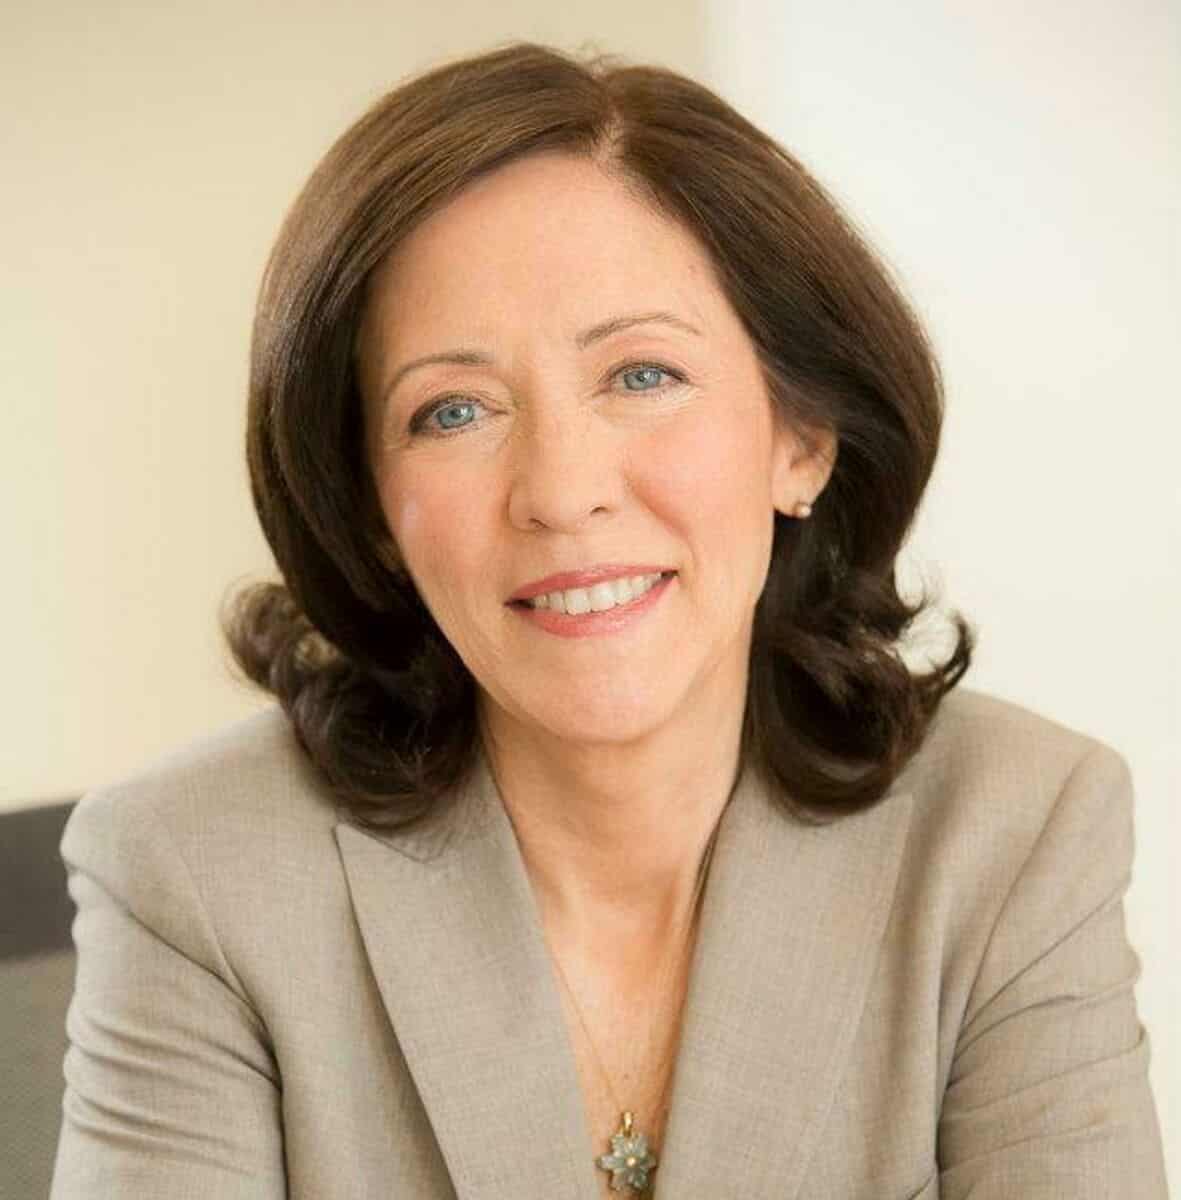 Maria Cantwell Net Worth Details, Personal Info